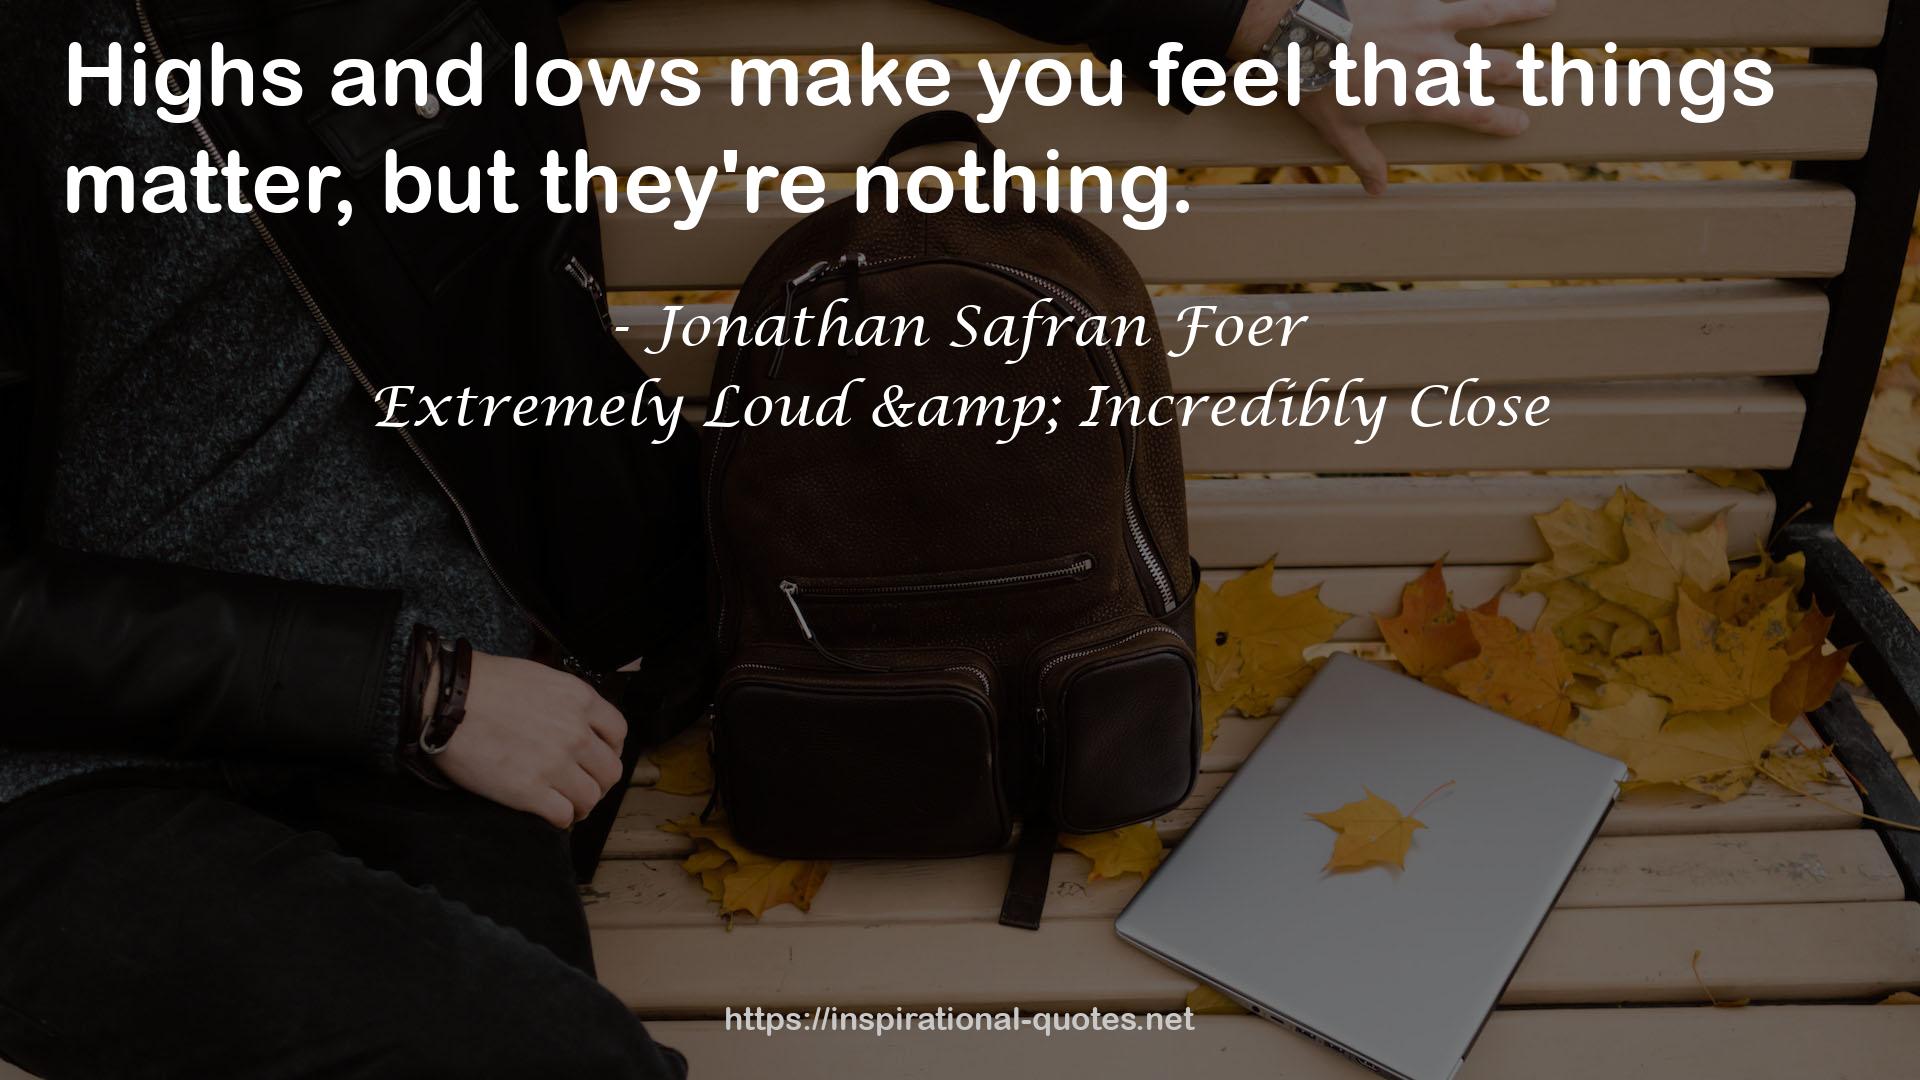 lows  QUOTES